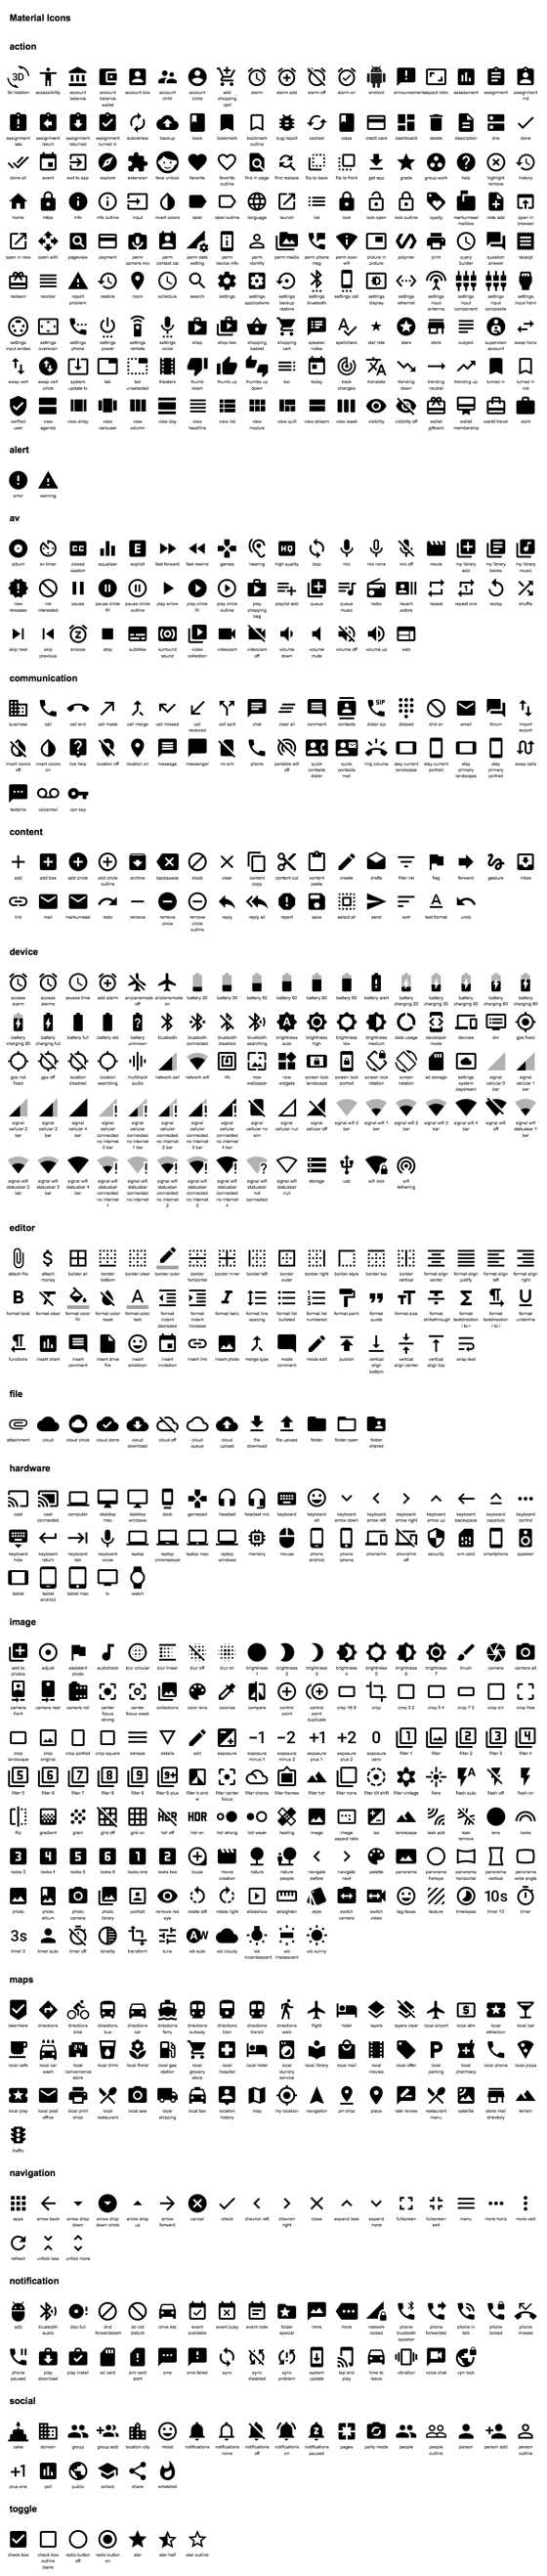 Material Icons Index.jpg